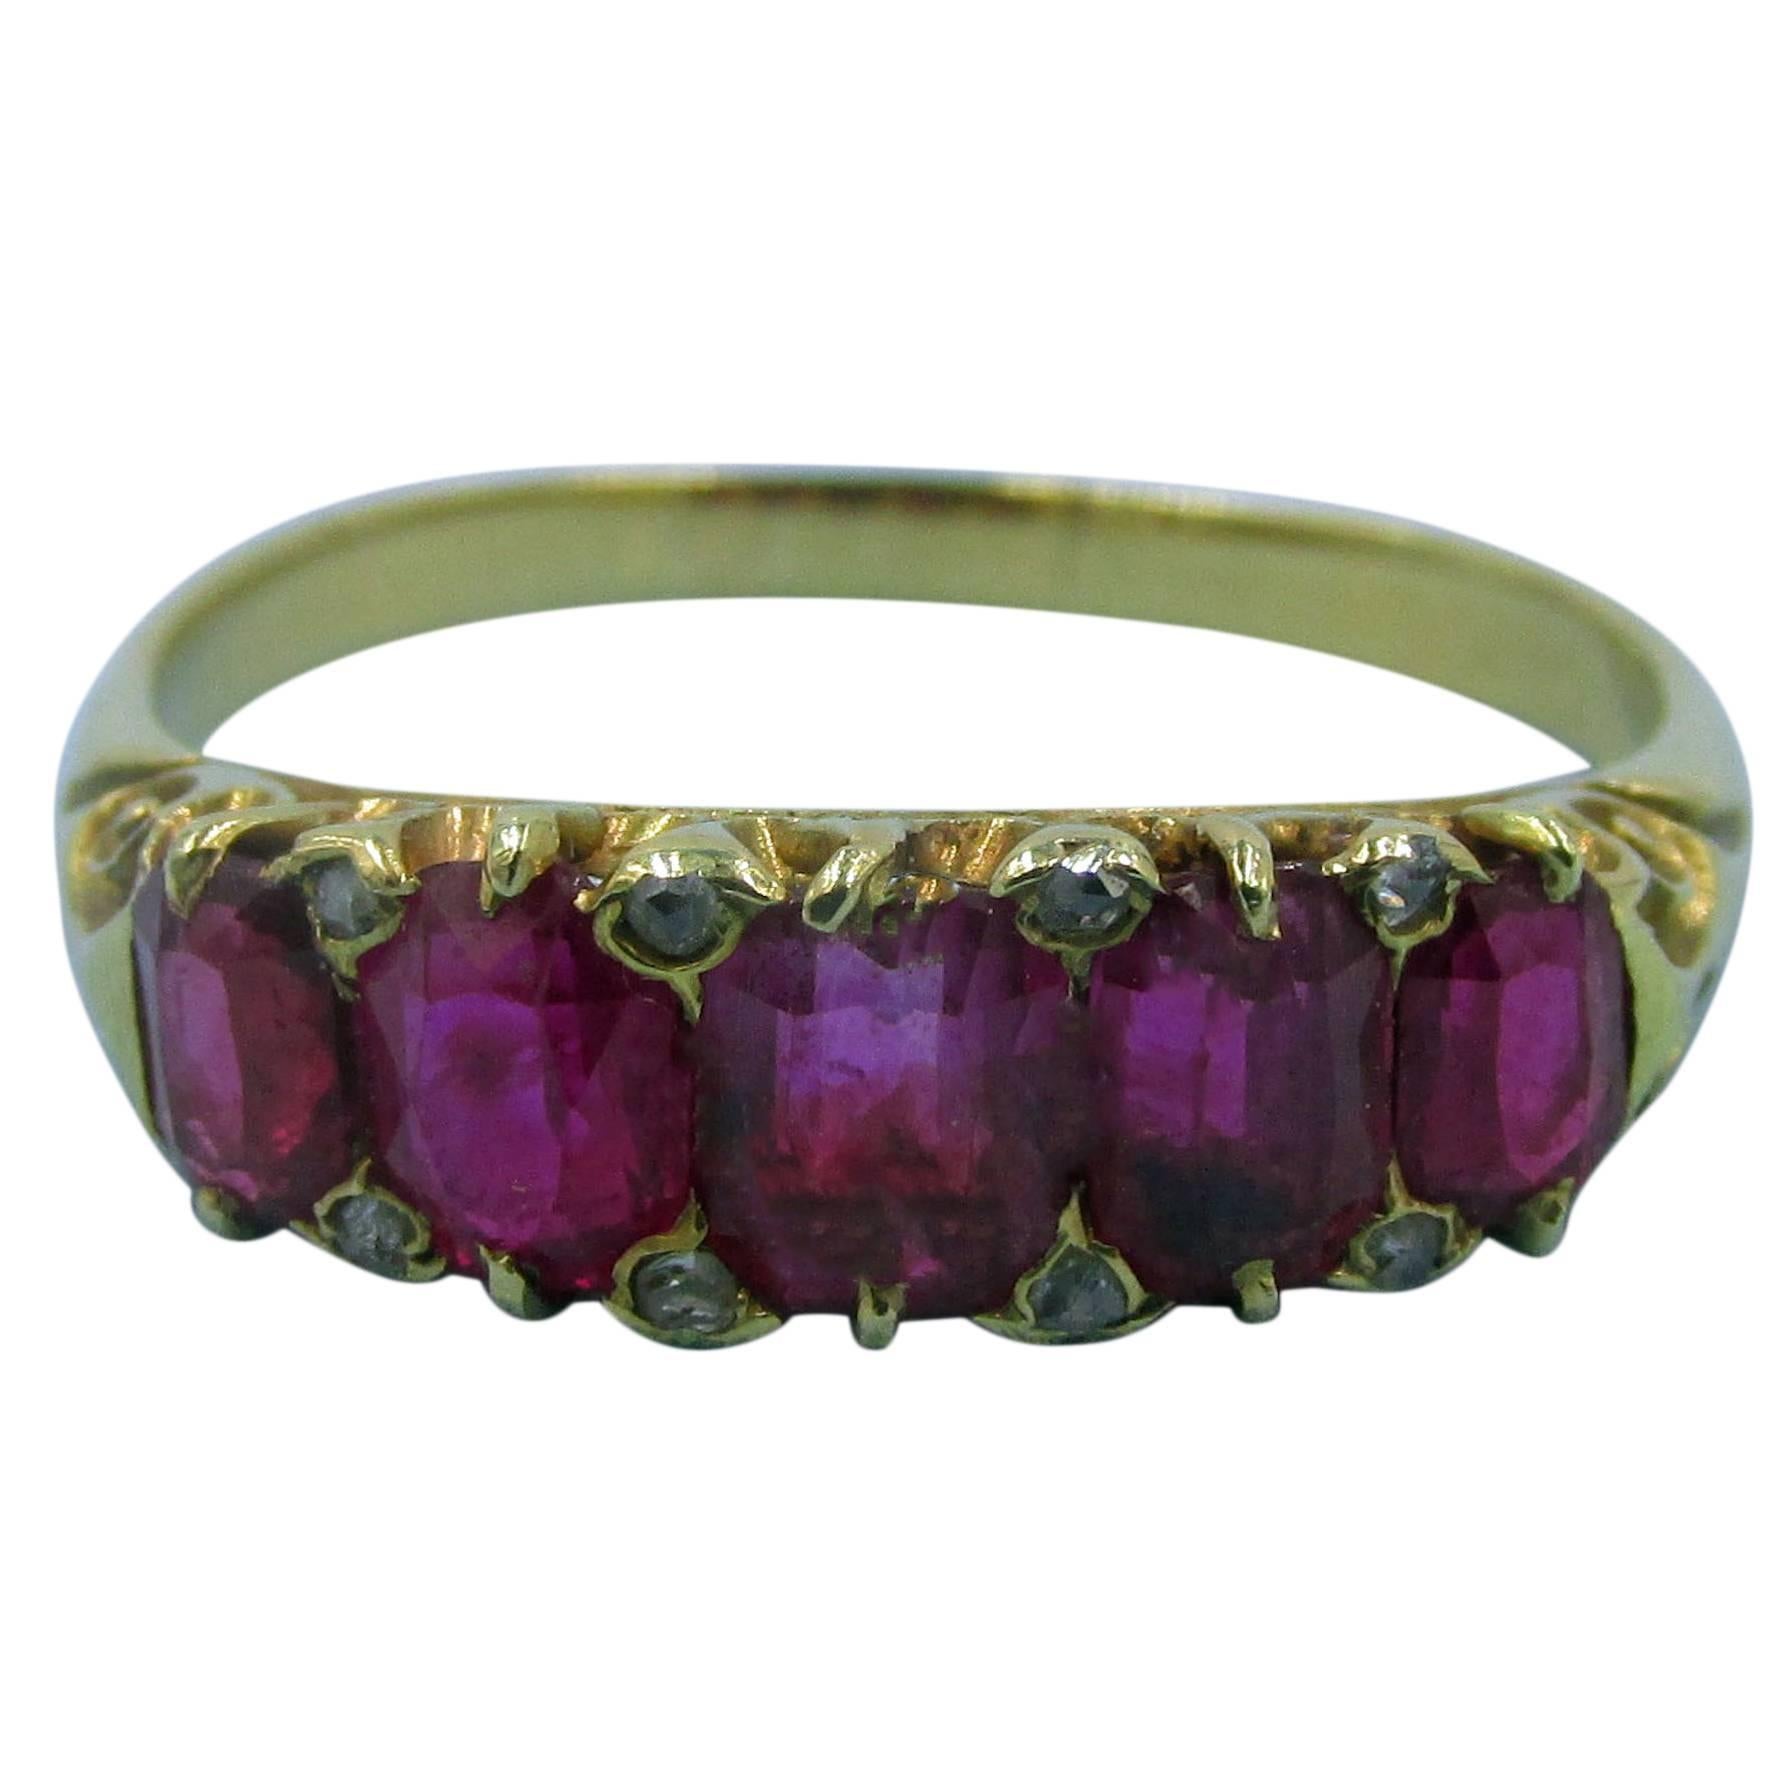 Antique Five-Stone Ruby Ring with Diamonds